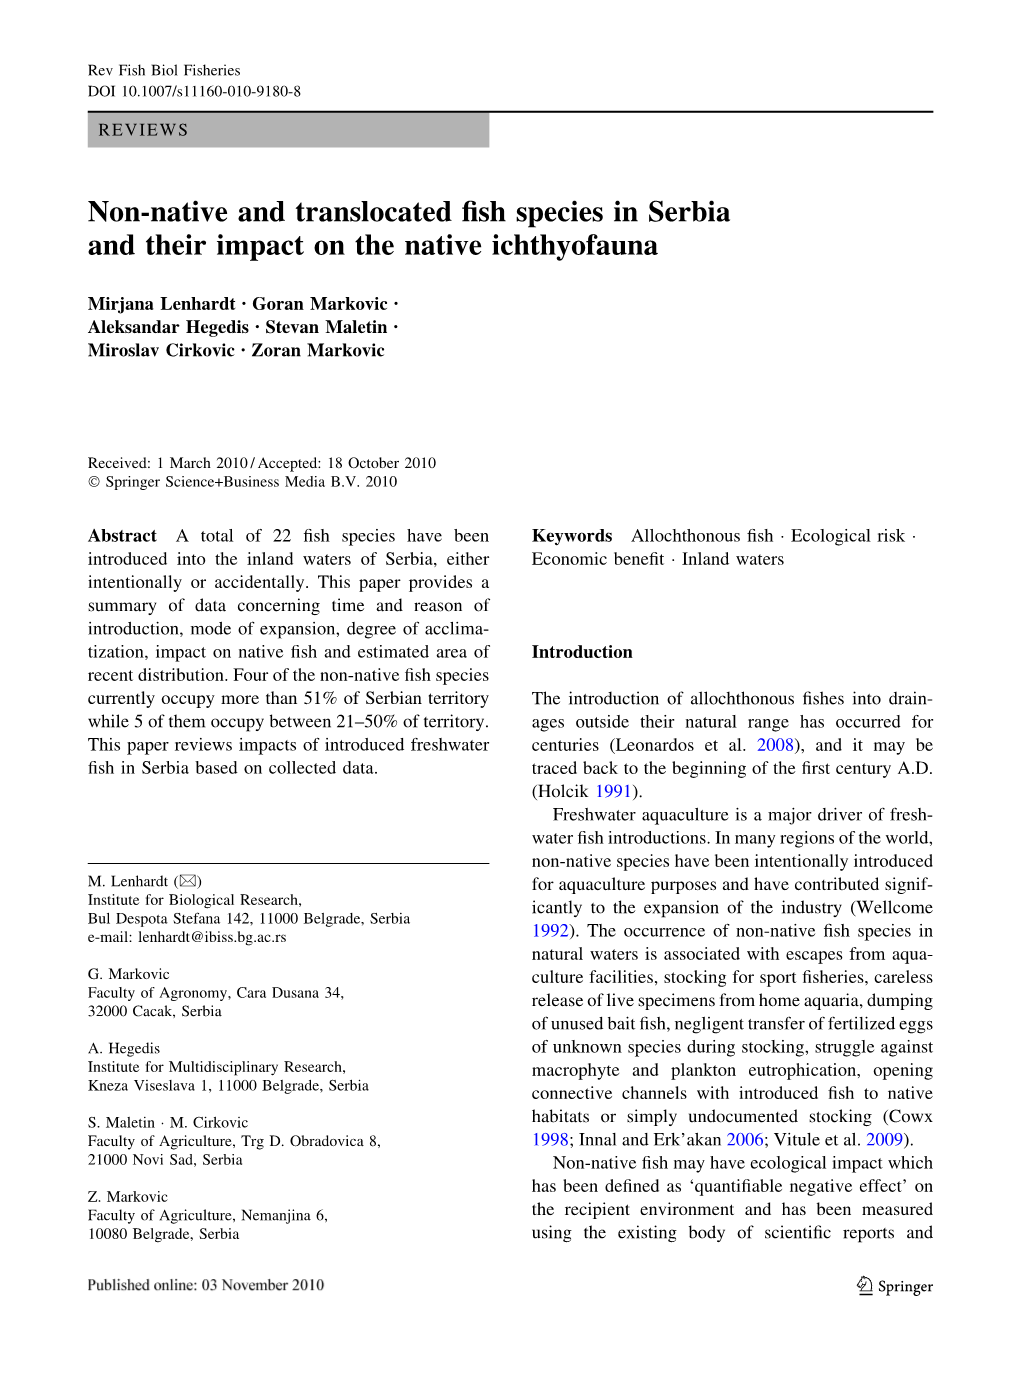 Non-Native and Translocated Fish Species in Serbia and Their Impact